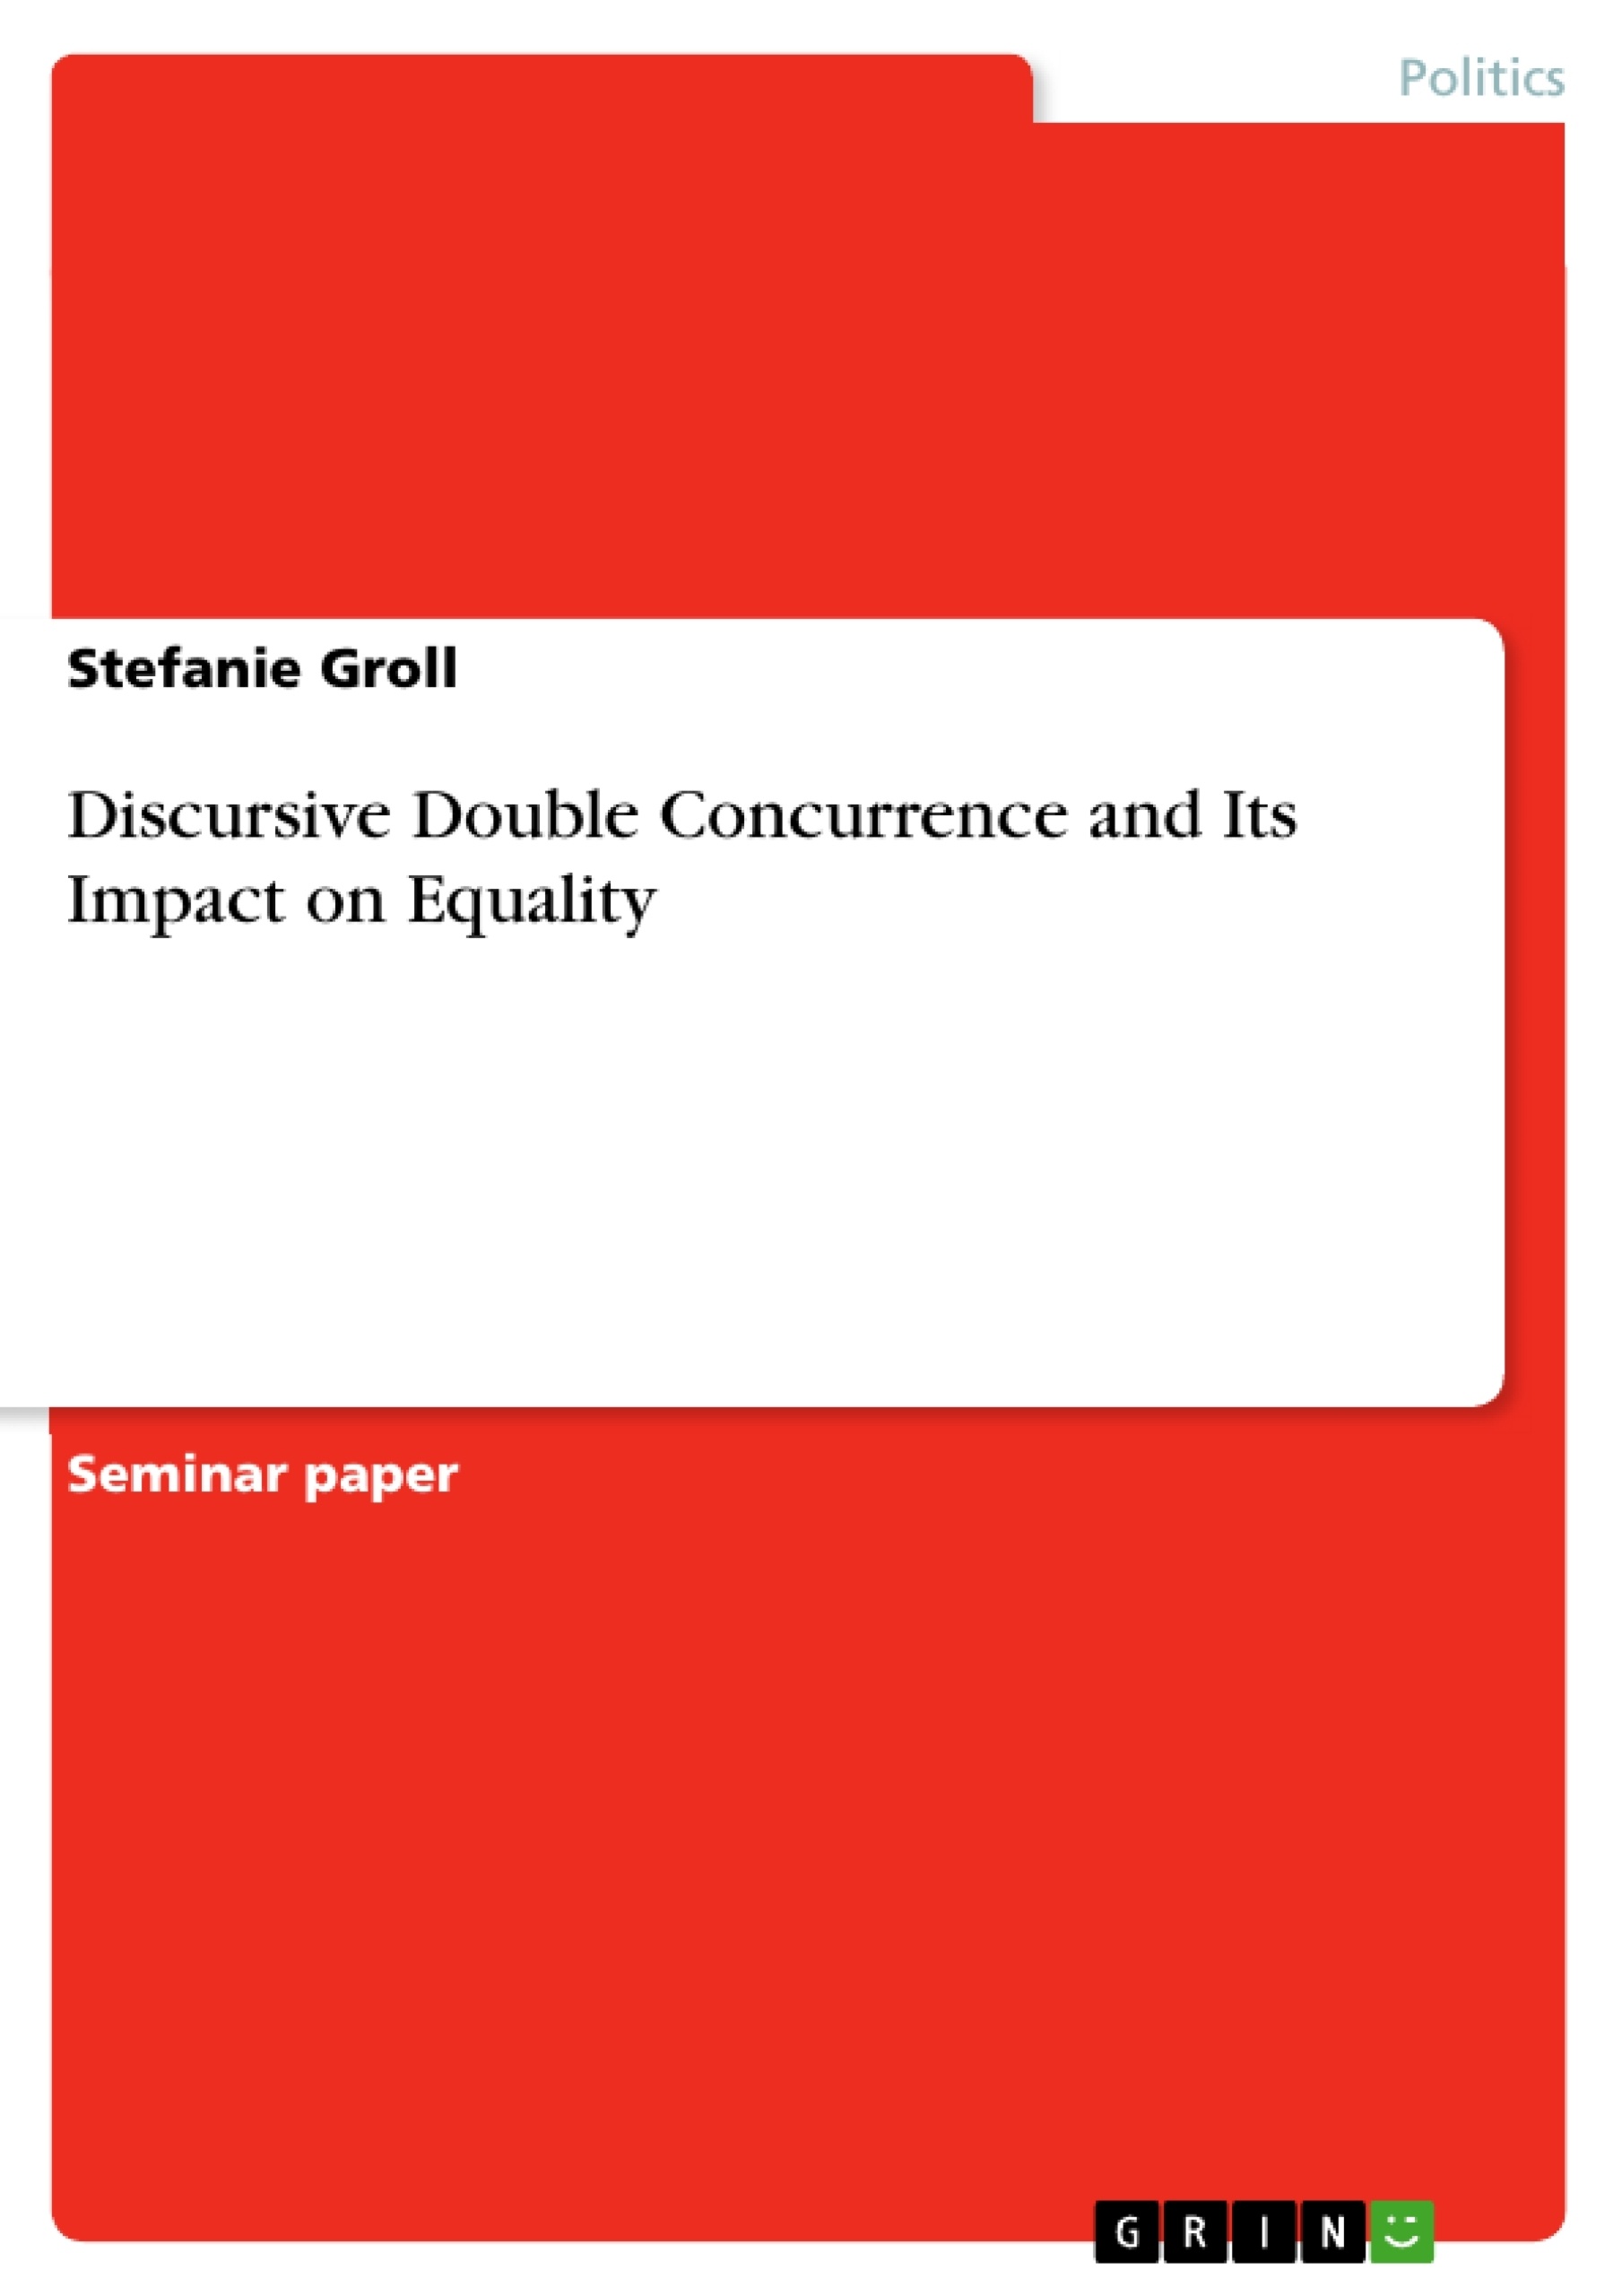 Título: Discursive Double Concurrence and Its Impact on Equality